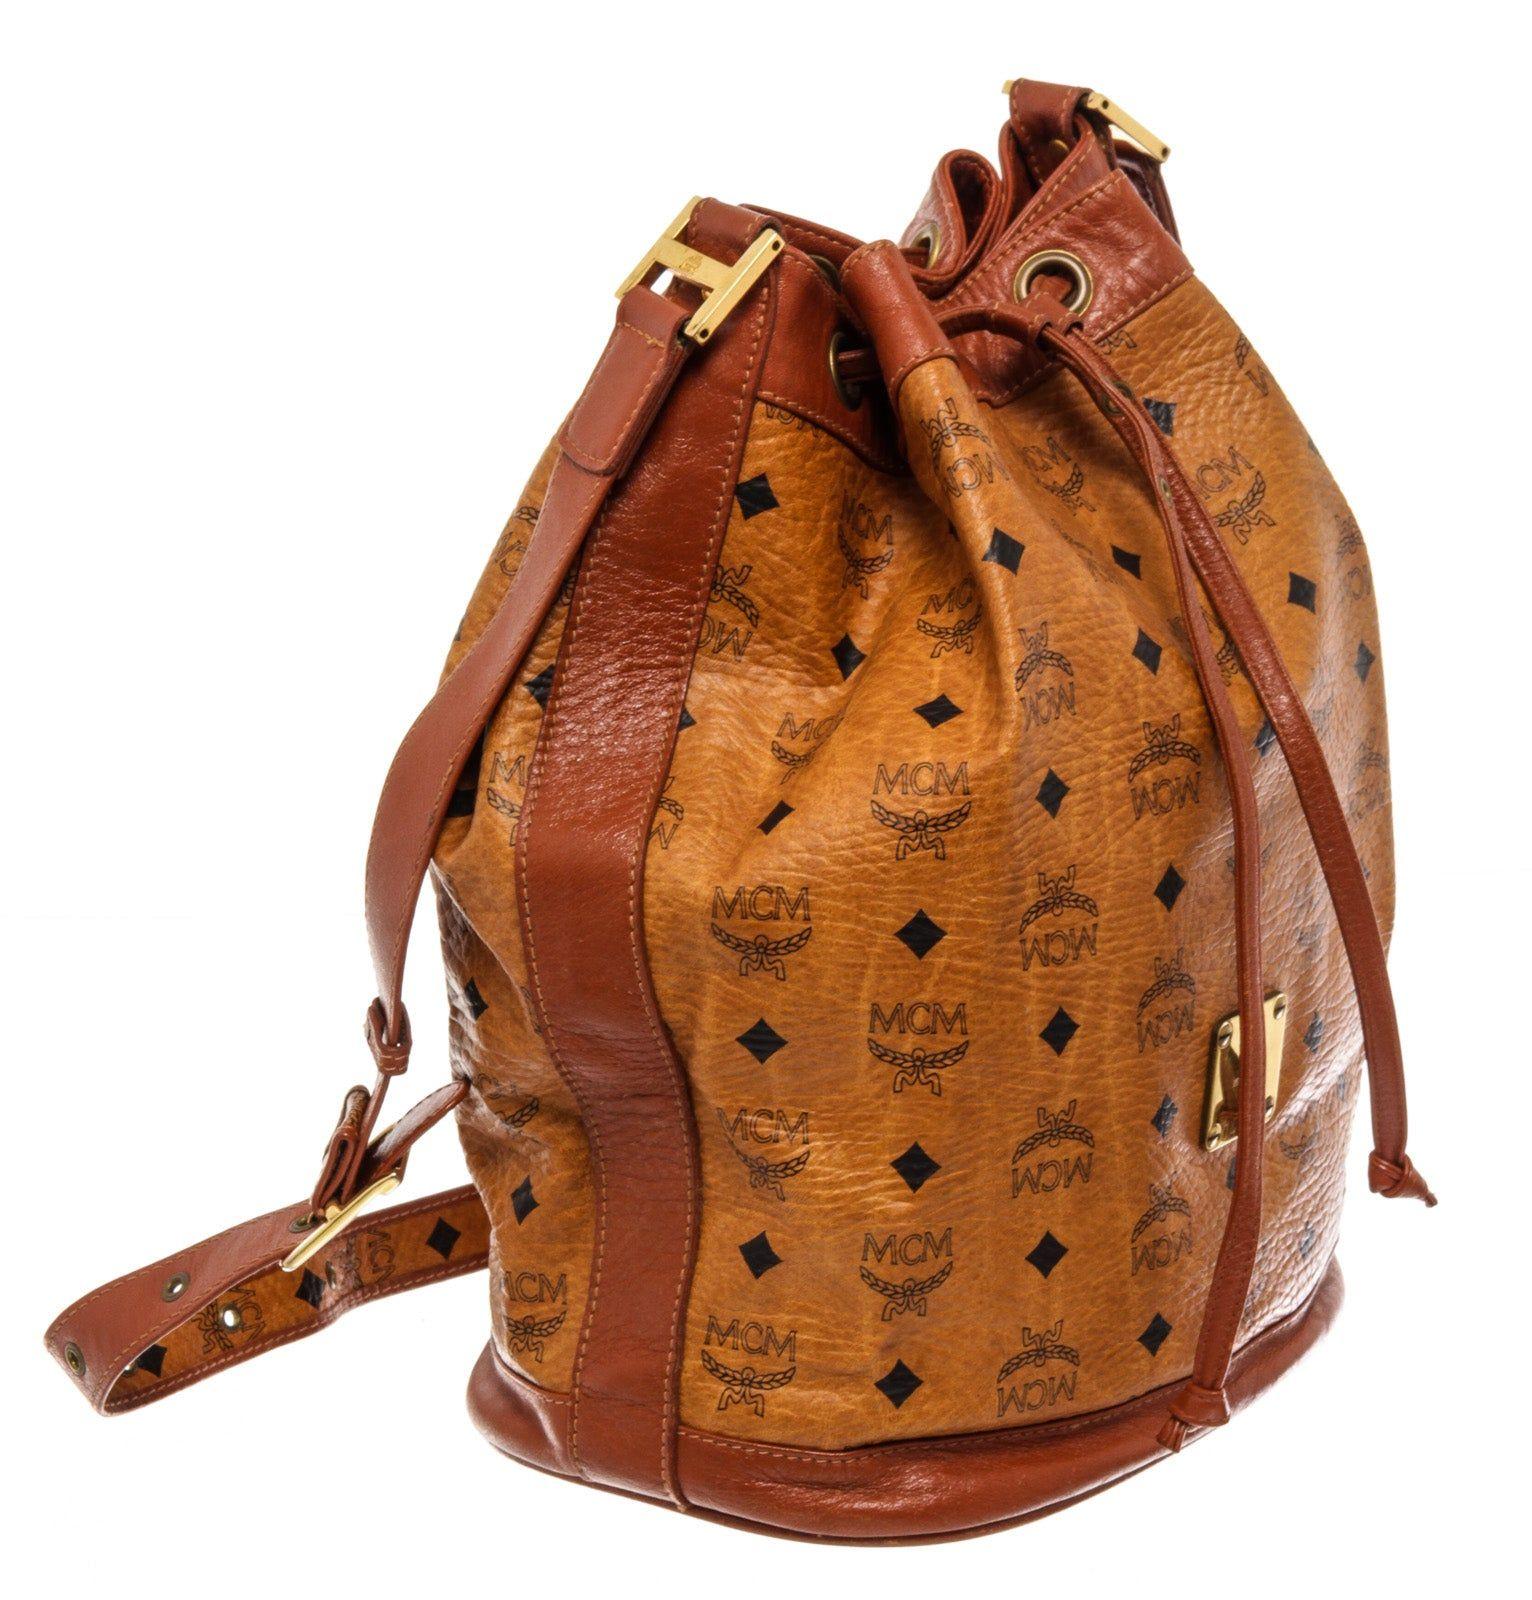 MCM Brown Visetos Coated Canvas Leather Bucket Bag with gold-tone hardware, trim visetos coated canvas leather, shoulder strap and drawstring closure.

62797MSC